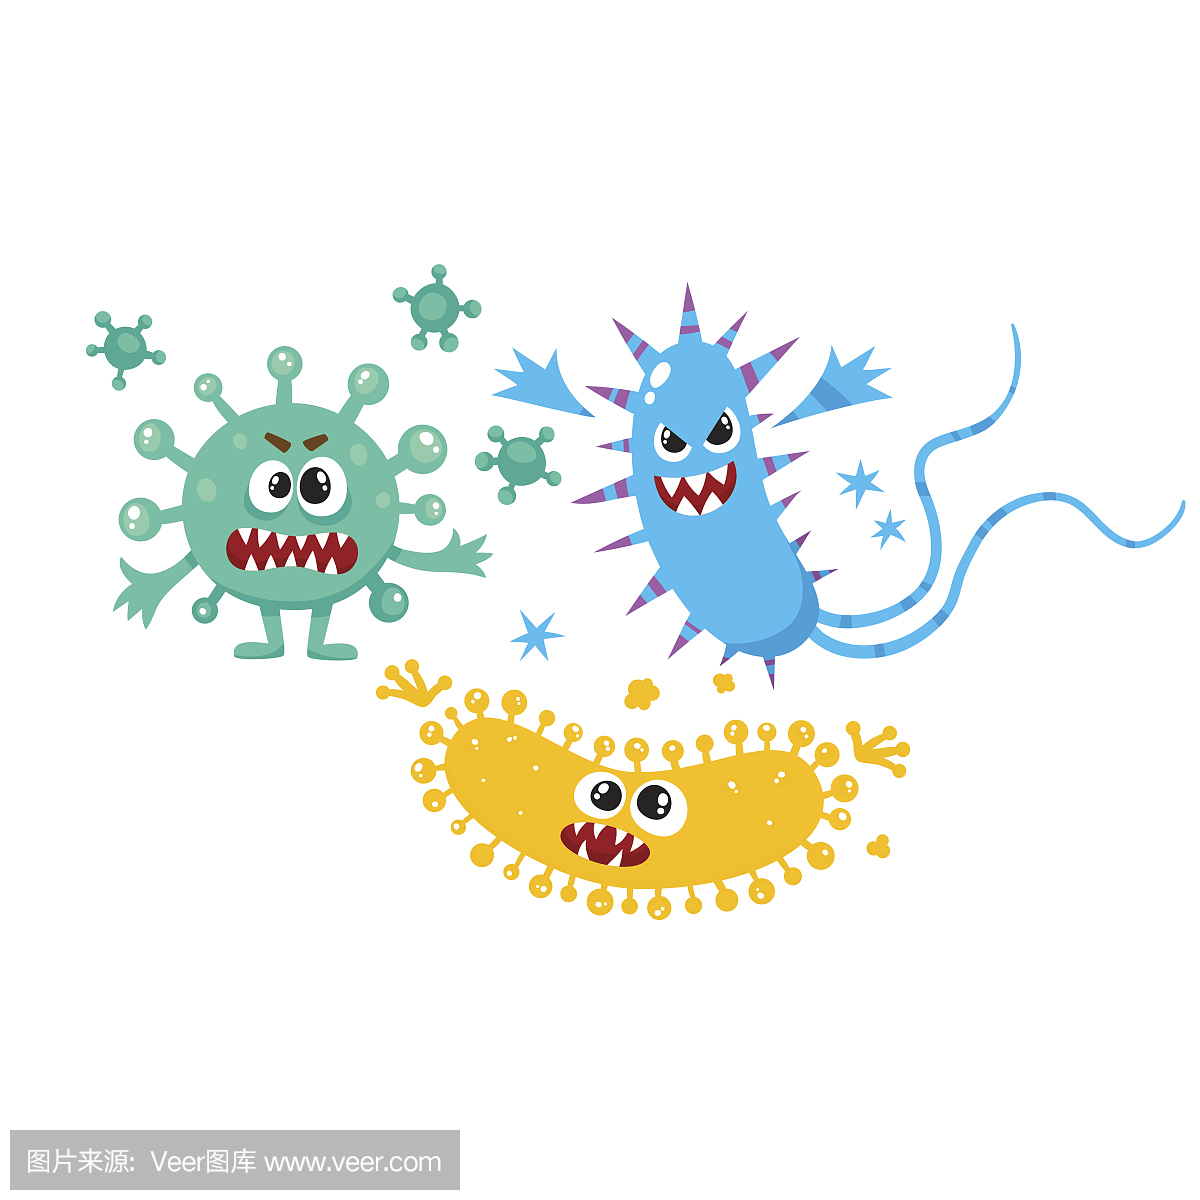 Microbes Clipart Transparent Background, Hand Drawn Cartoon Bacteria ...